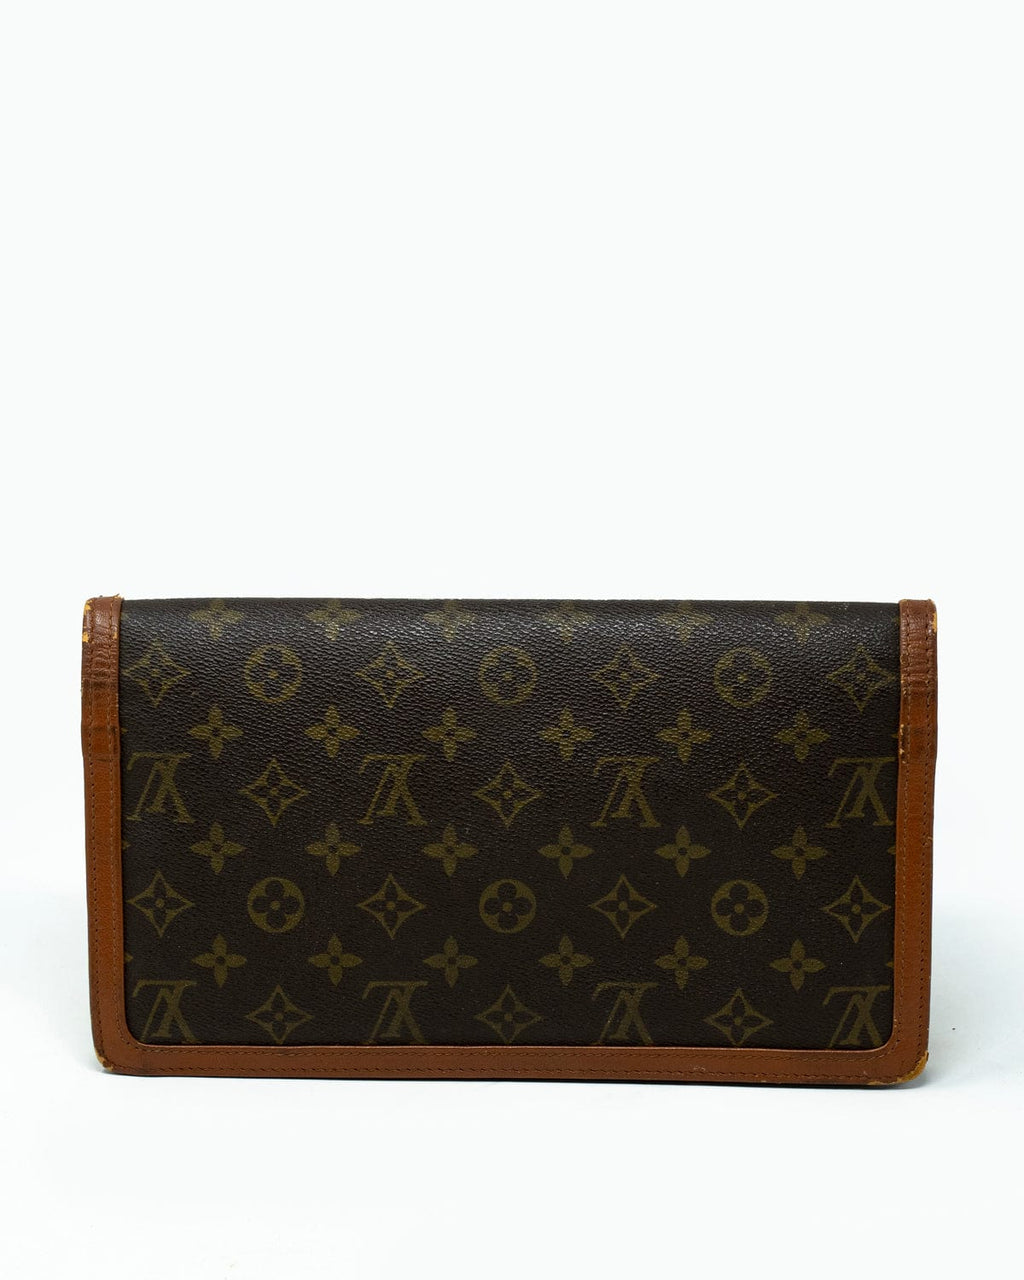 JZC7524 Monogram Pochette Dame GM Since year 1982 Only the bag